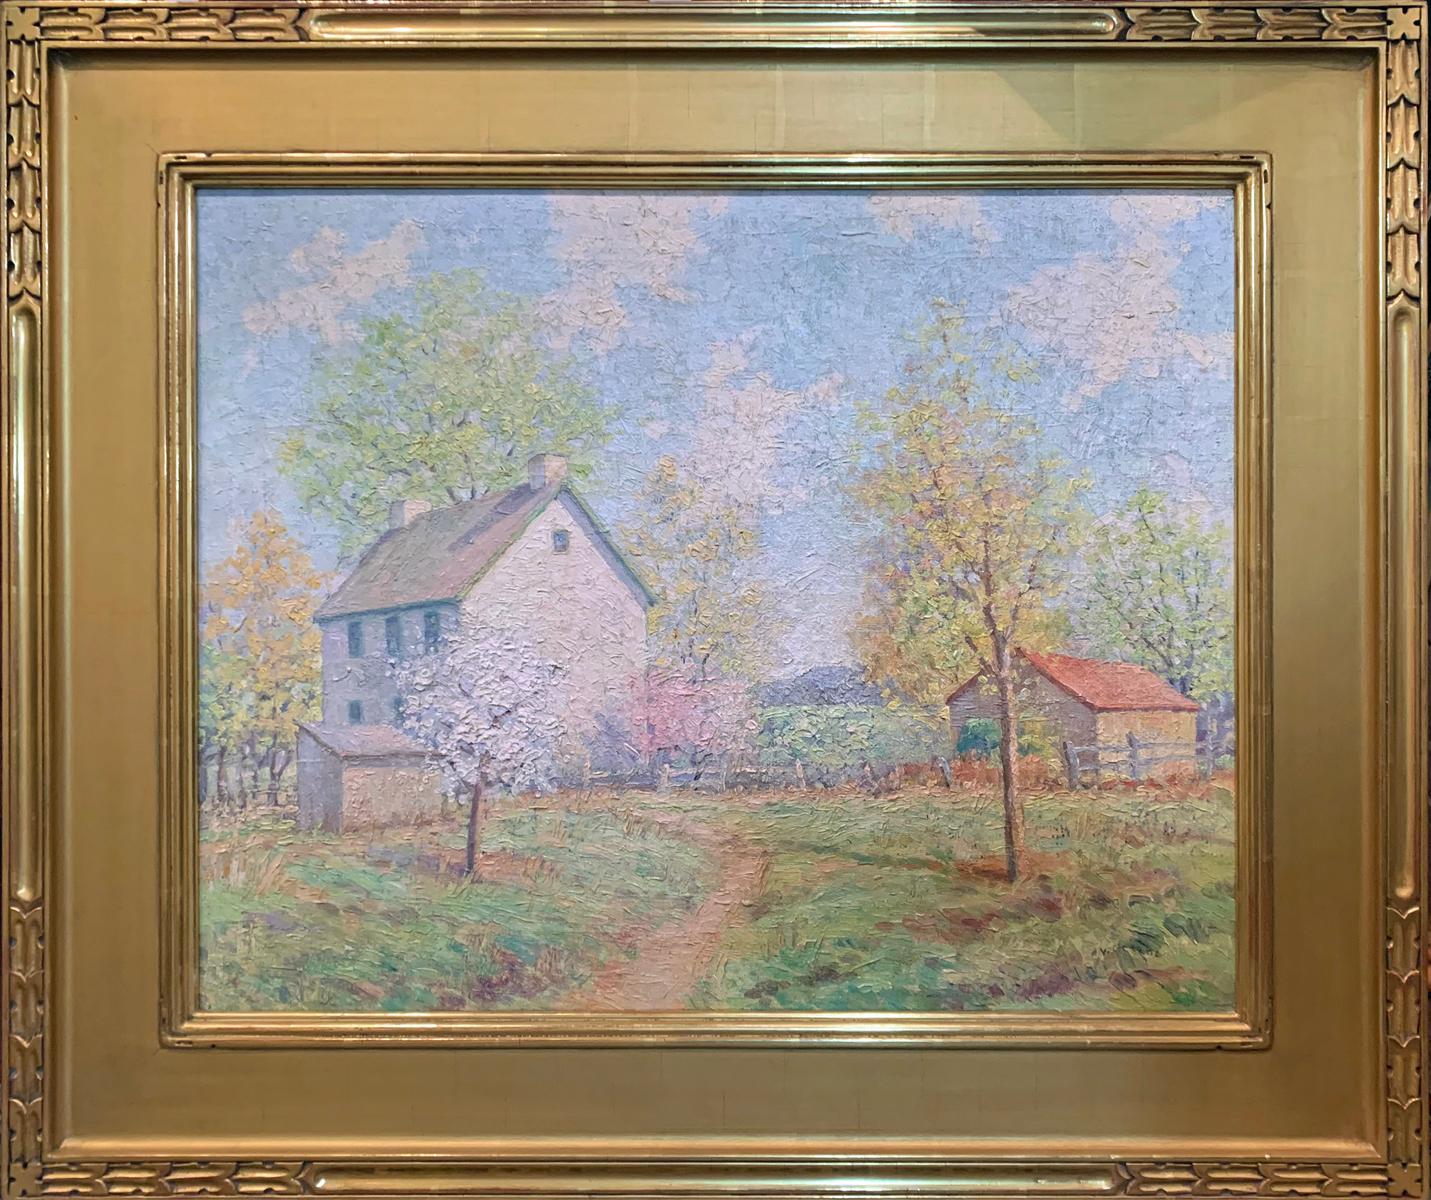 "The Joy of Spring" is a 18" x 24" oil on canvas, impressionist painting by Albert Van Nesse Greene. It is framed and signed "A V Greene" at the lower right. The painting came from a private collection in Chester Springs, Pennsylvania. Additional